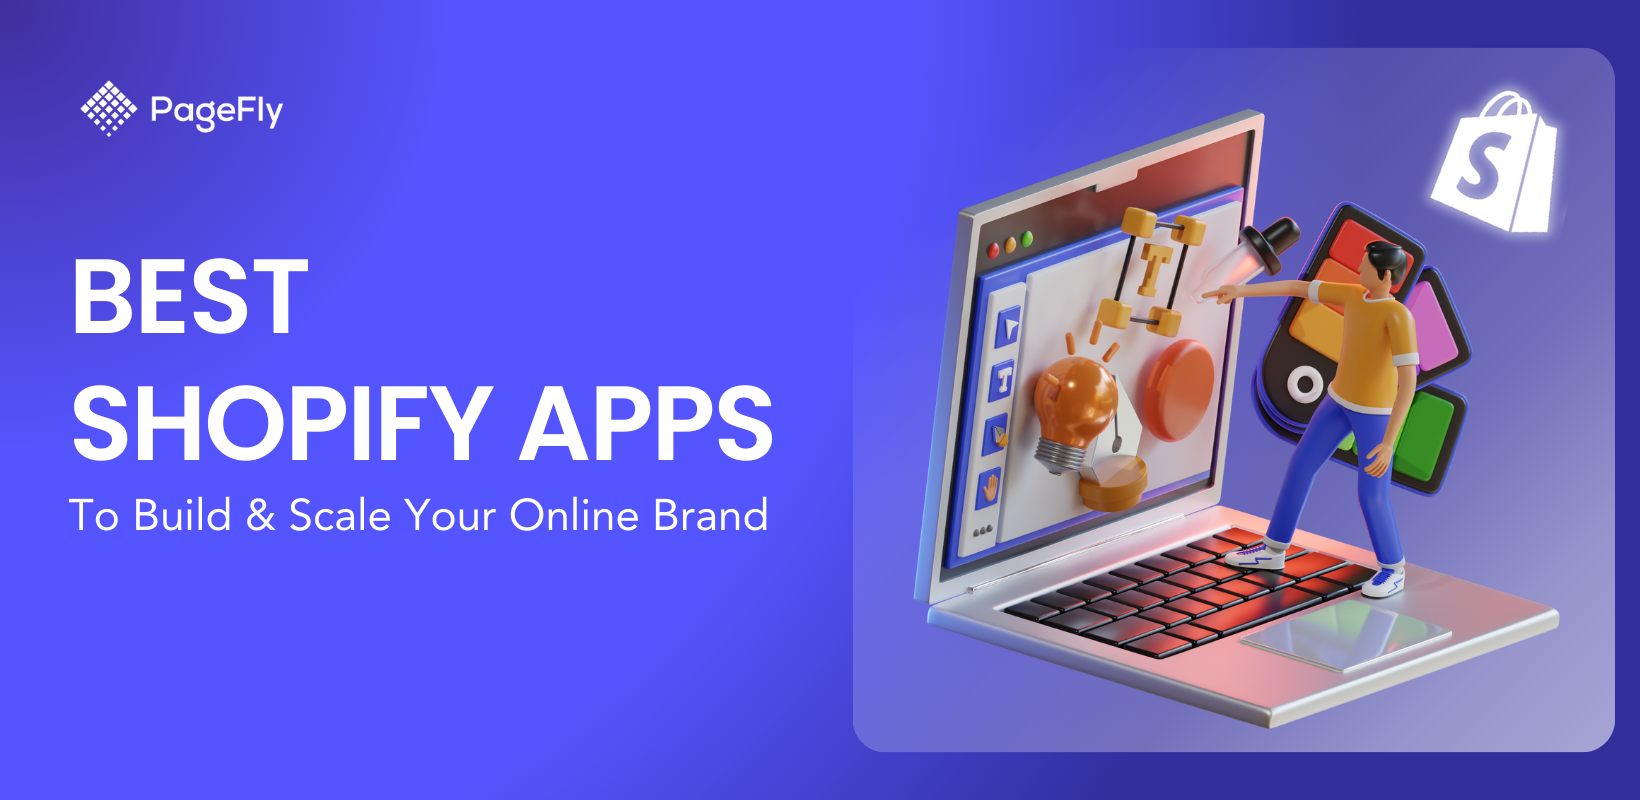 20 Best Shopify Apps To Build & Scale Your Online Brand